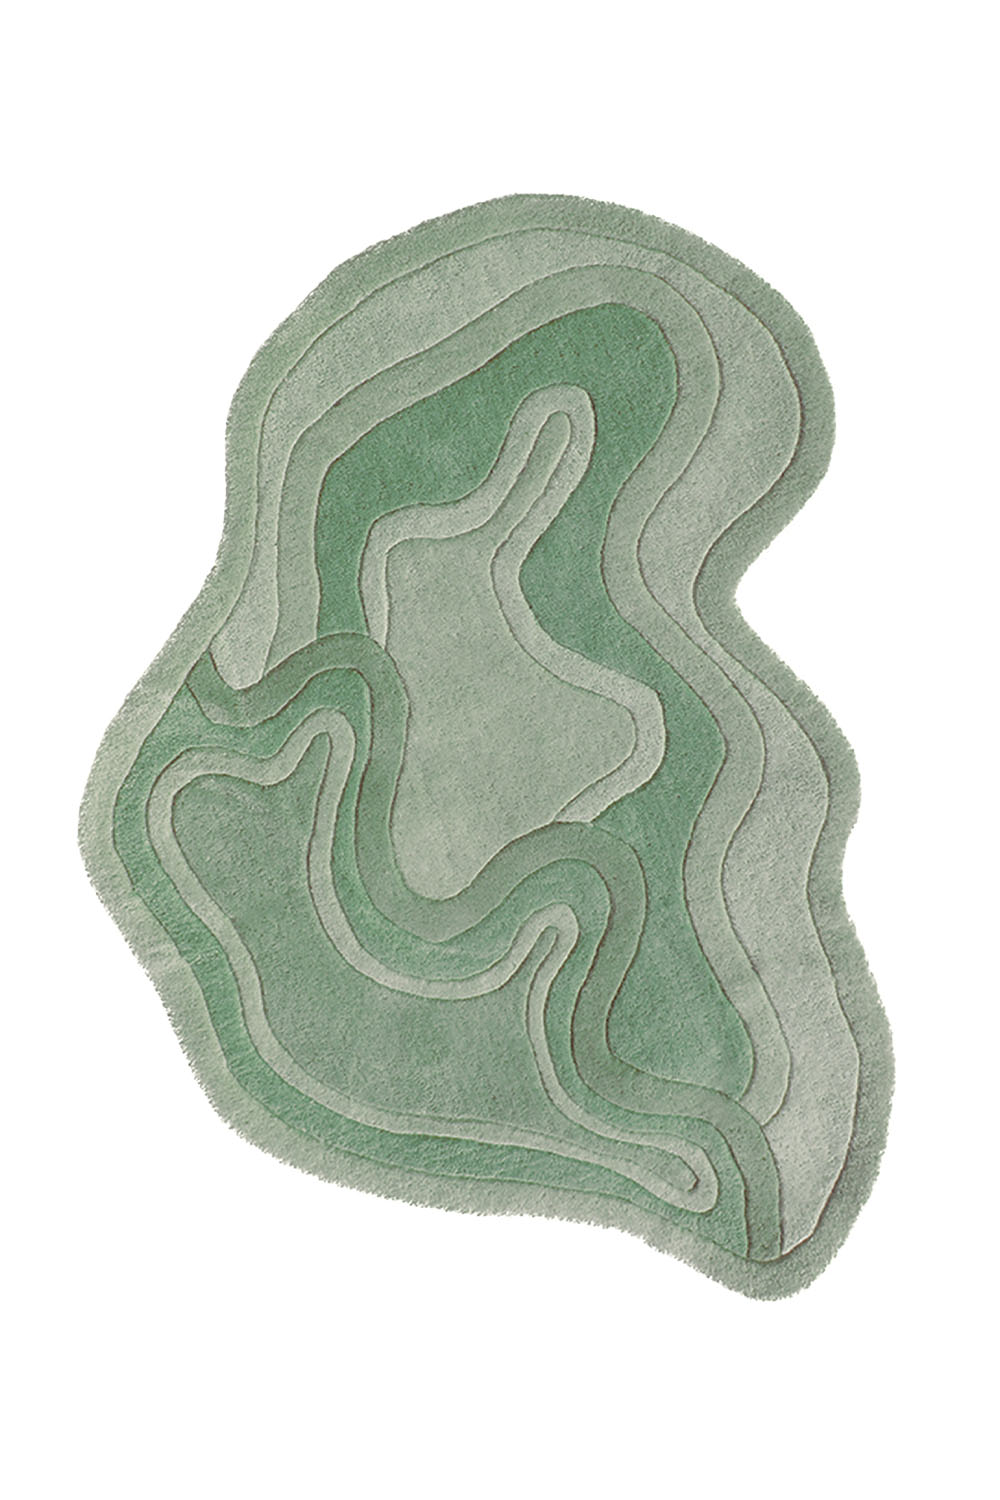 Rolling Tides Hand Tufted Wool Rug in Soft Green by Jubi